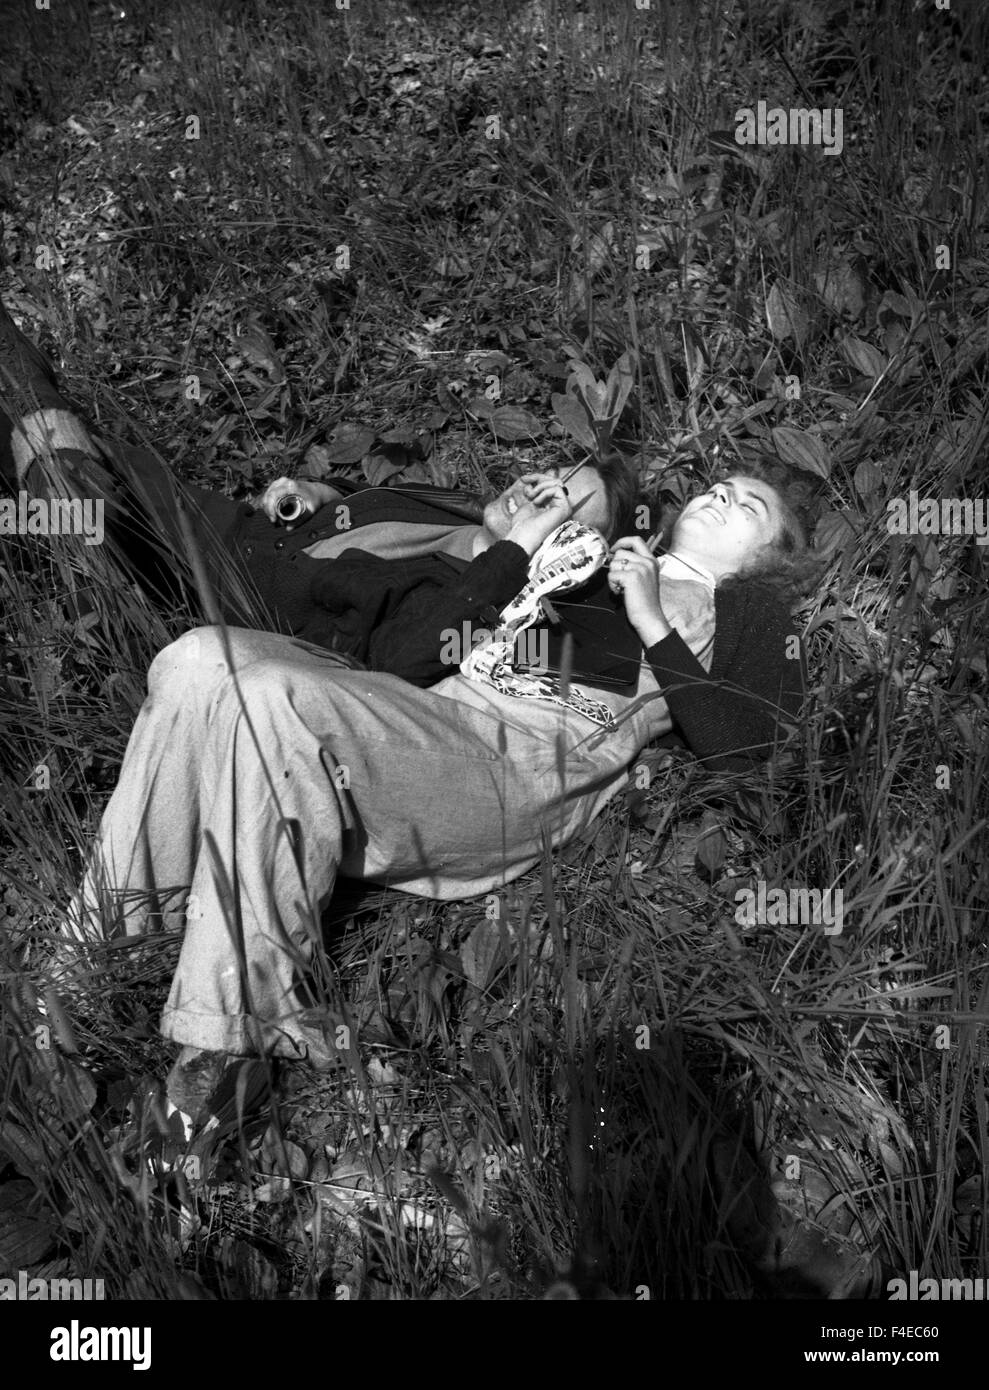 high school or college sweethearts laying in the grass during the 1940s Stock Photo